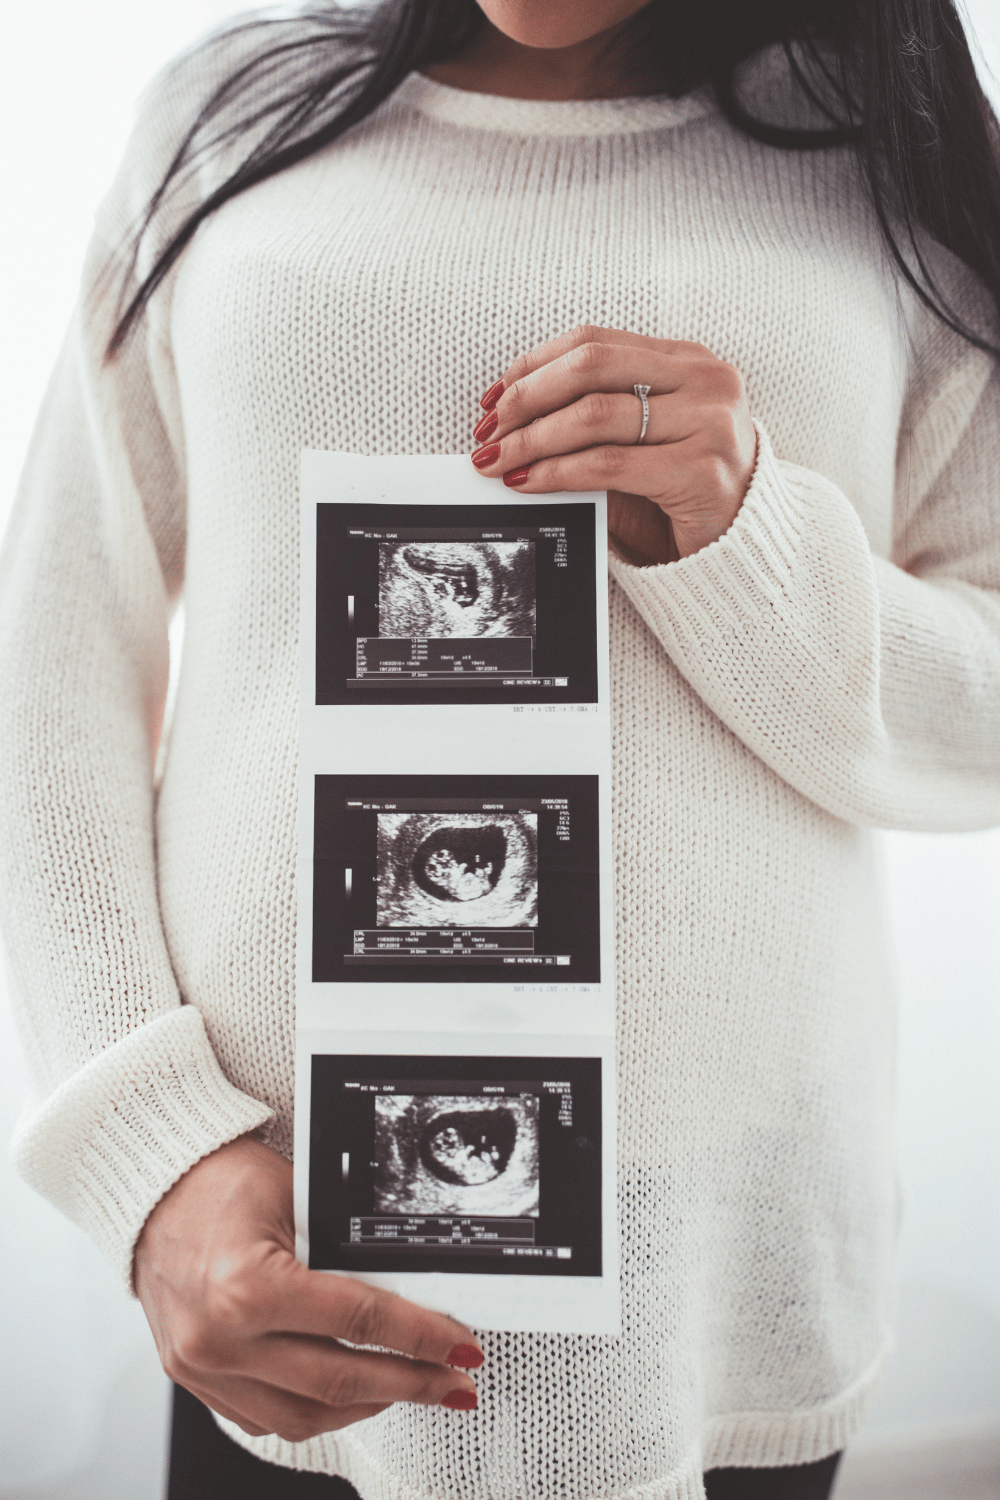 A Visual Guide to Your Growing Baby: What to Expect from Your First Ultrasound